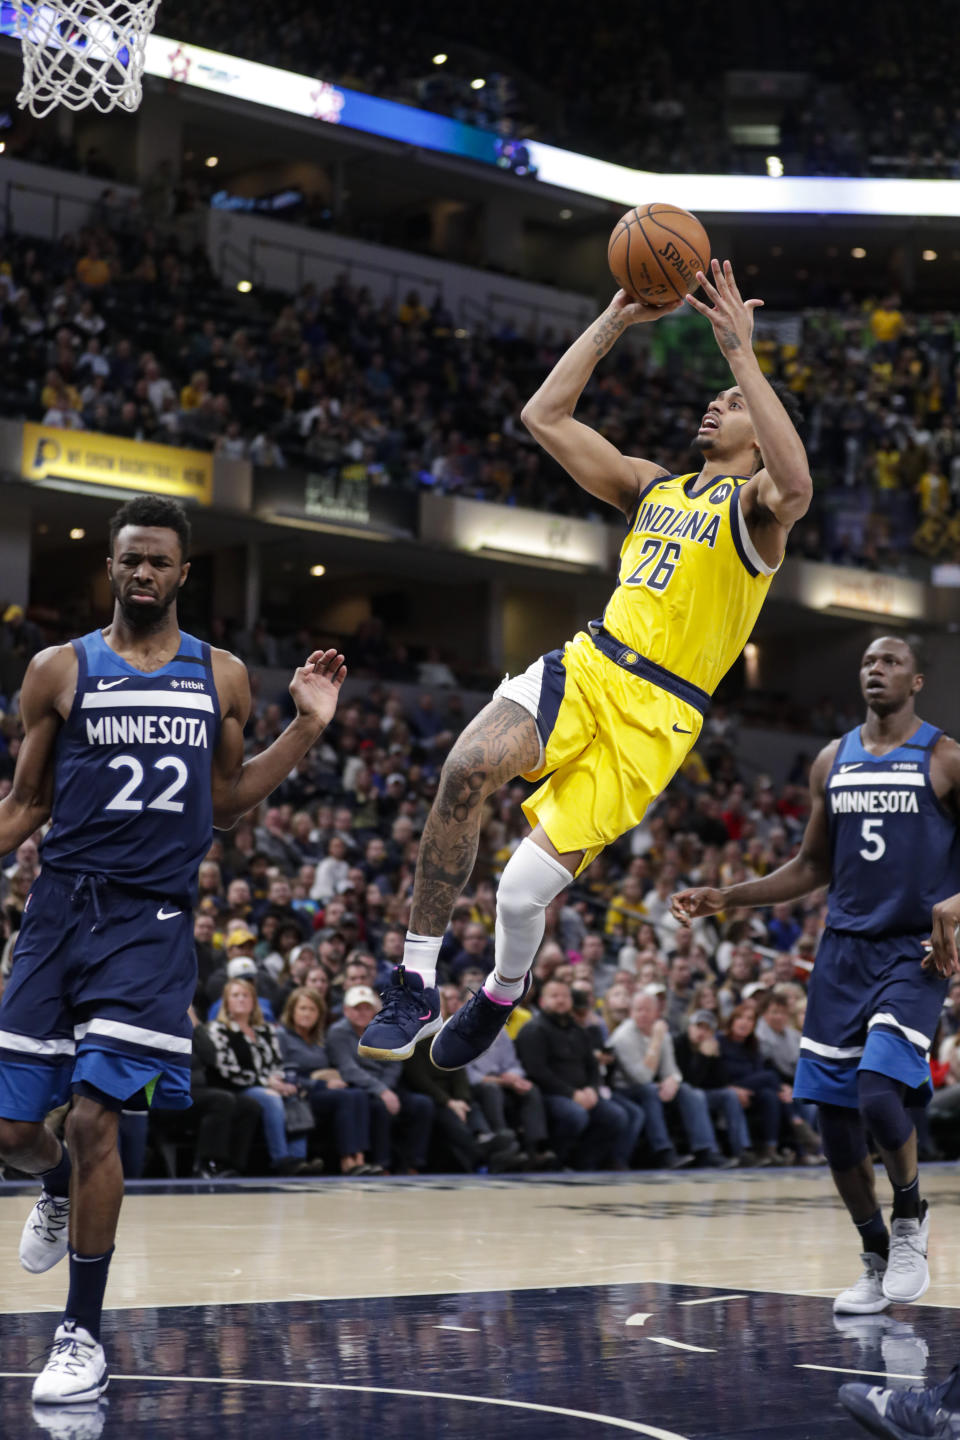 Indiana Pacers guard Jeremy Lamb (26) shoots between Minnesota Timberwolves forward Andrew Wiggins (22) and center Gorgui Dieng (5) during the second half of an NBA basketball game in Indianapolis, Friday, Jan. 17, 2020. The Pacers won 116-114. (AP Photo/Michael Conroy)